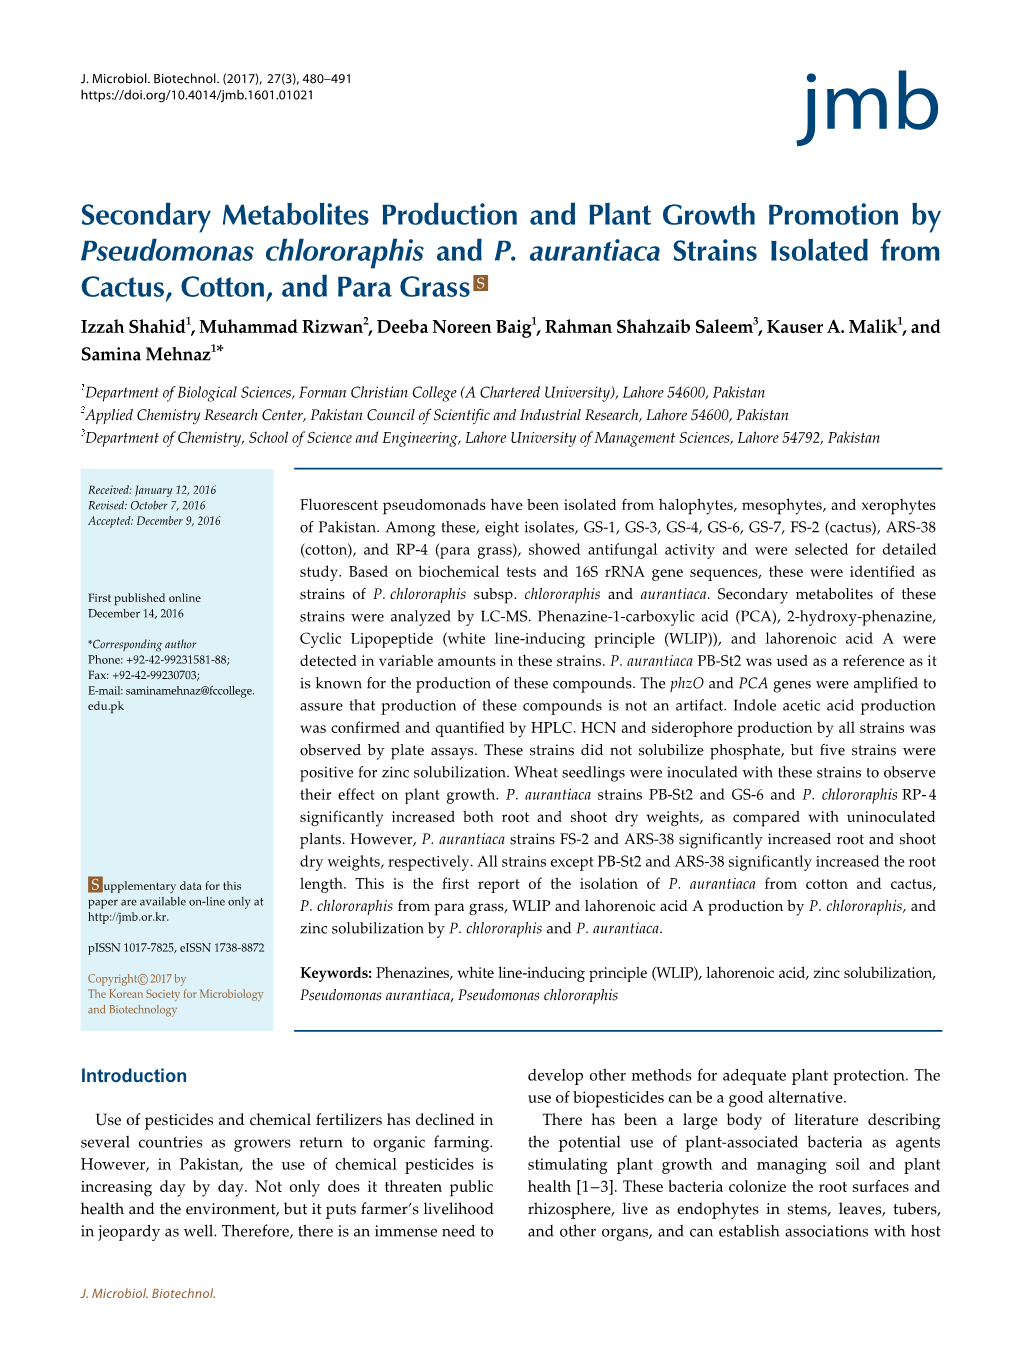 Secondary Metabolites Production and Plant Growth Promotion by Pseudomonas Chlororaphis and P